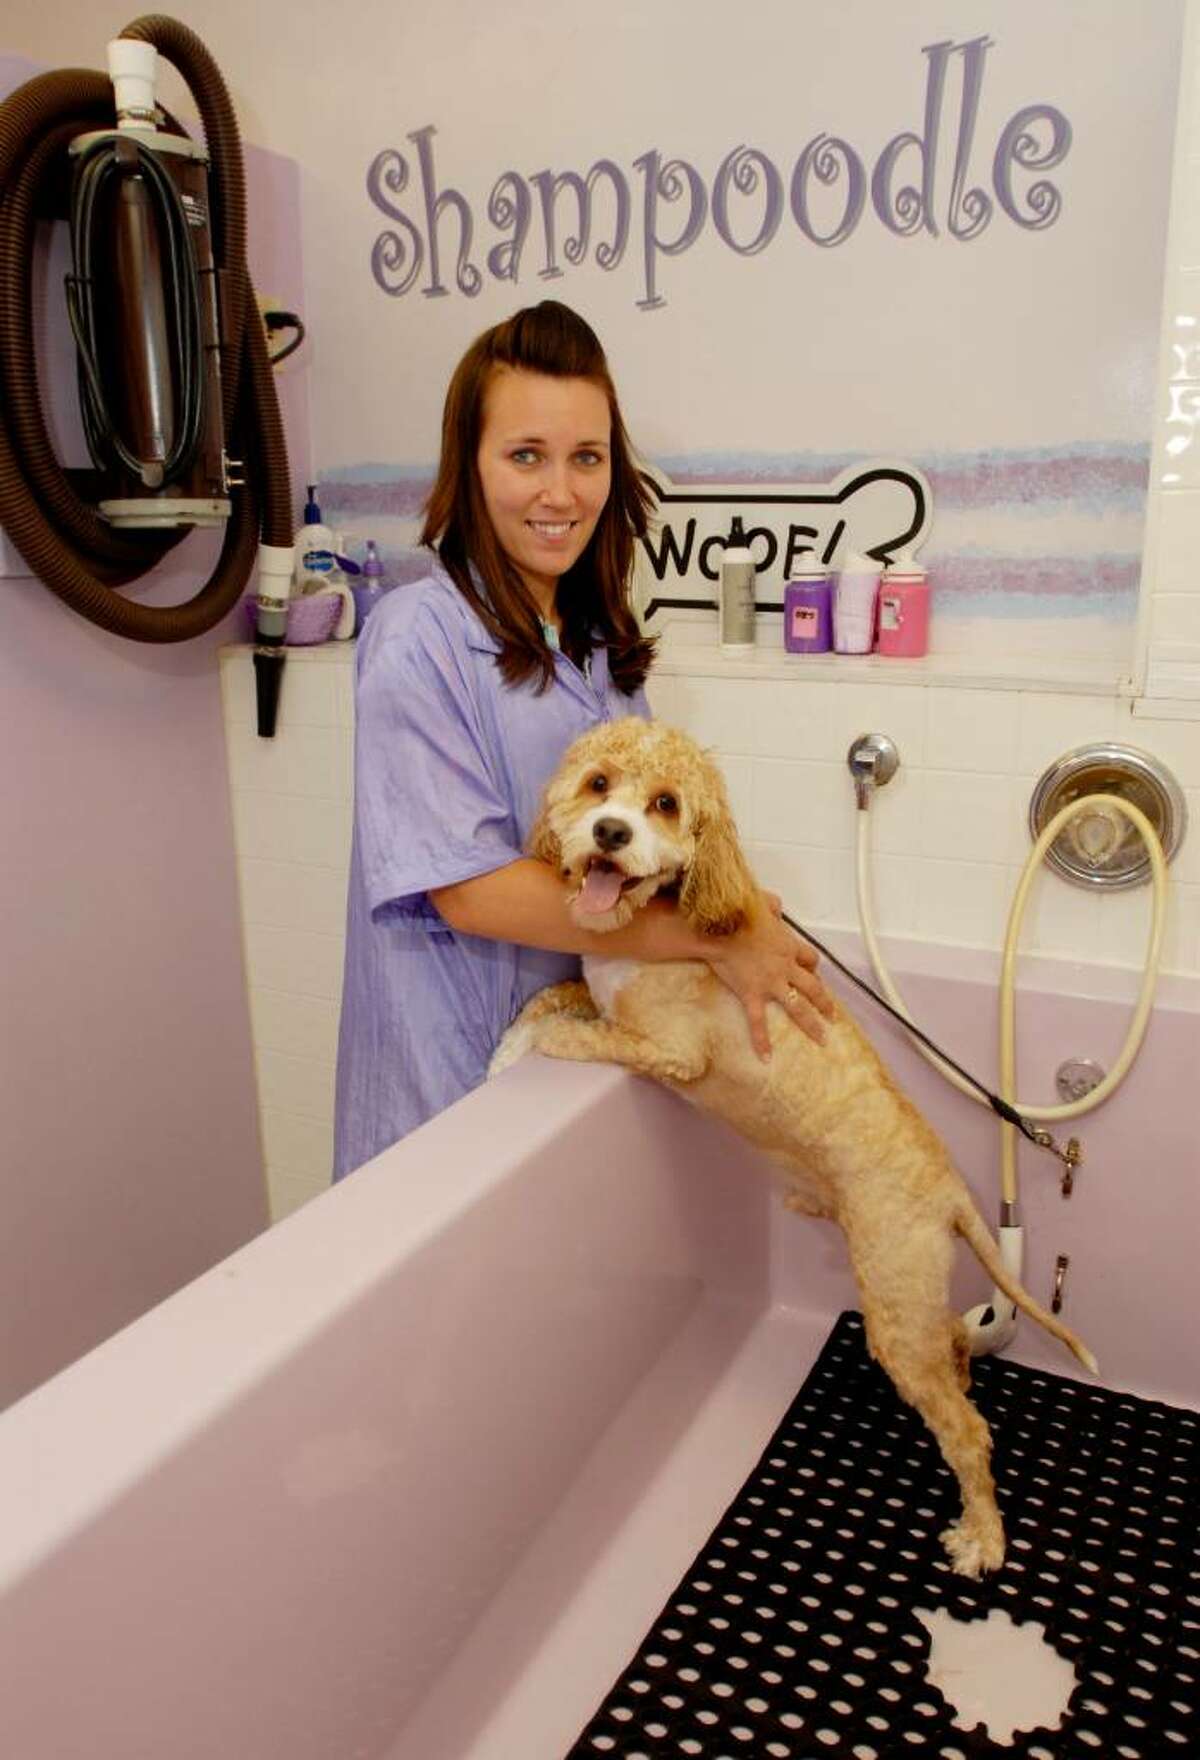 Stephanie Moon, manager at "Shampoodle," works with Cody, who had the washing and grooming services at the shop in Delmar. (Luanne M. Ferris / Times Union)